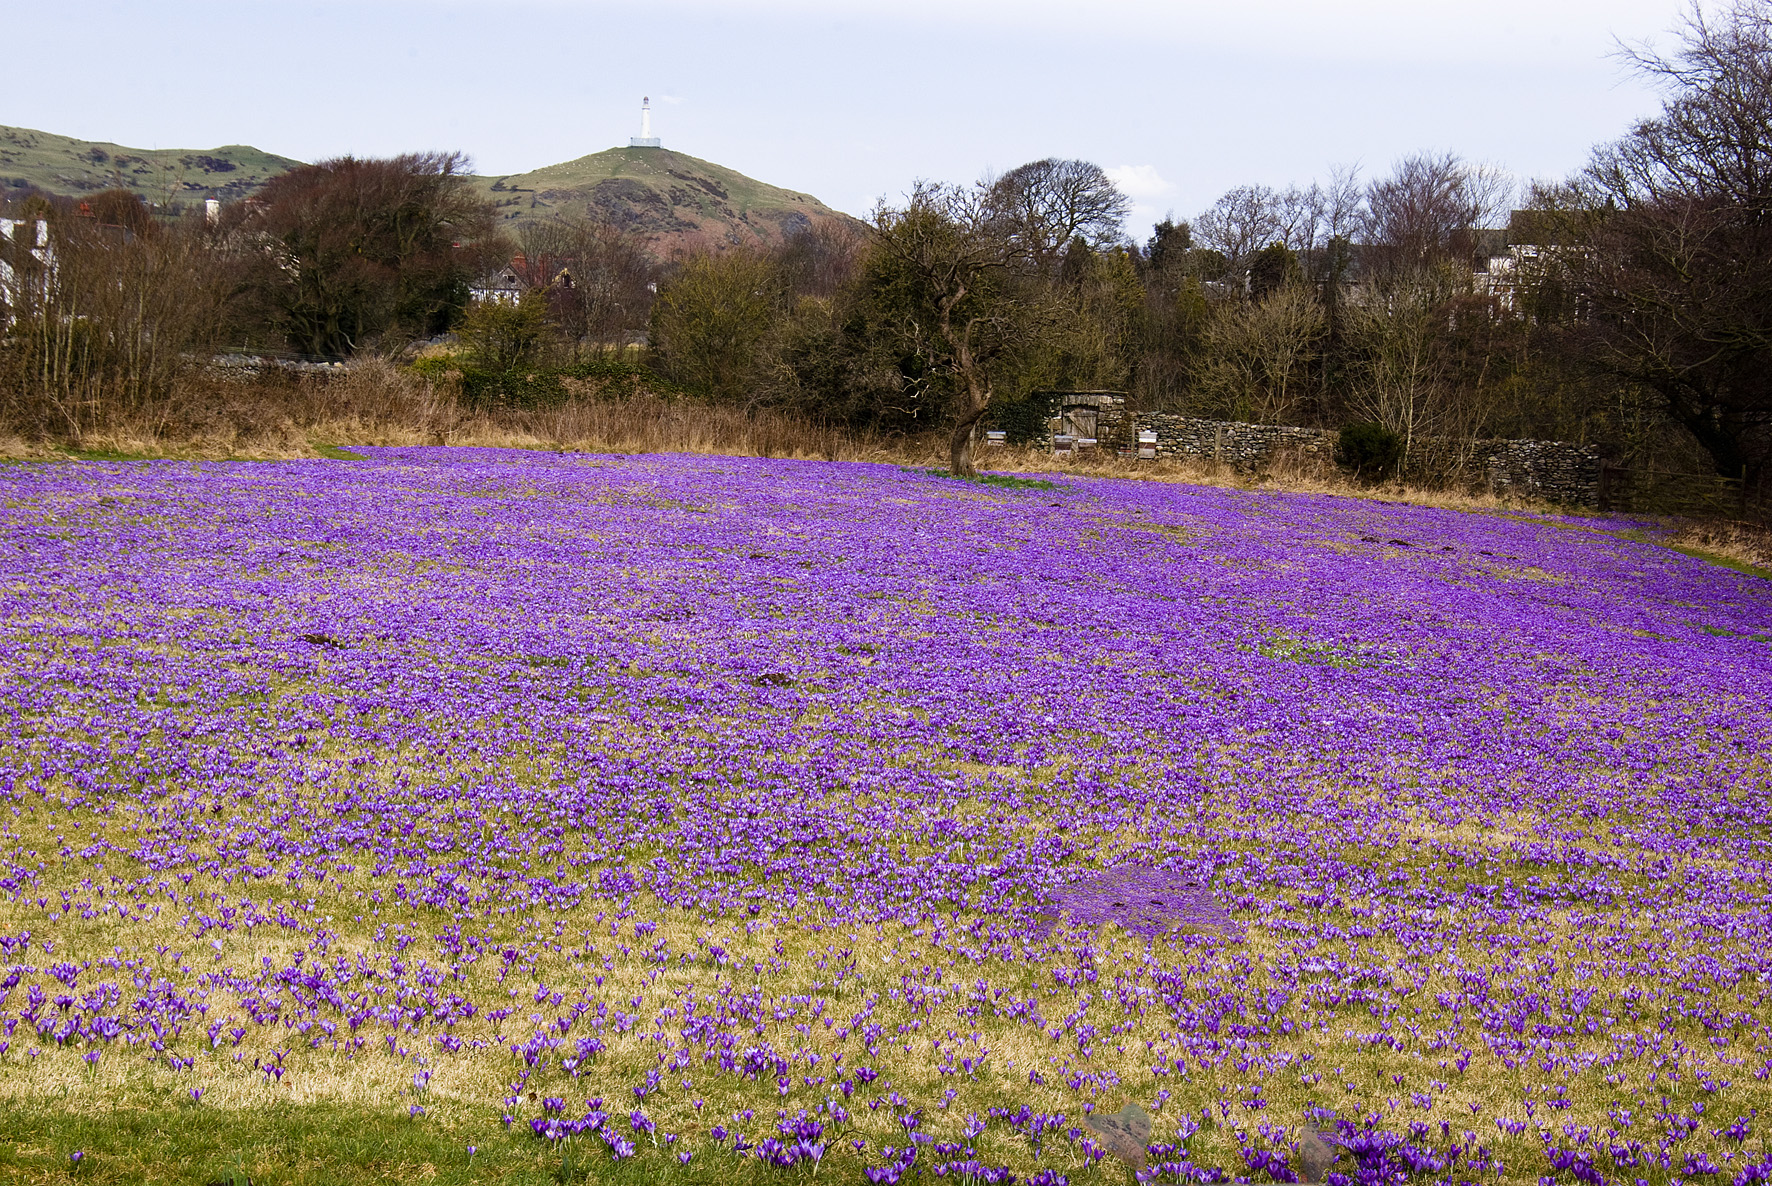 picture shows a field of purple crocus